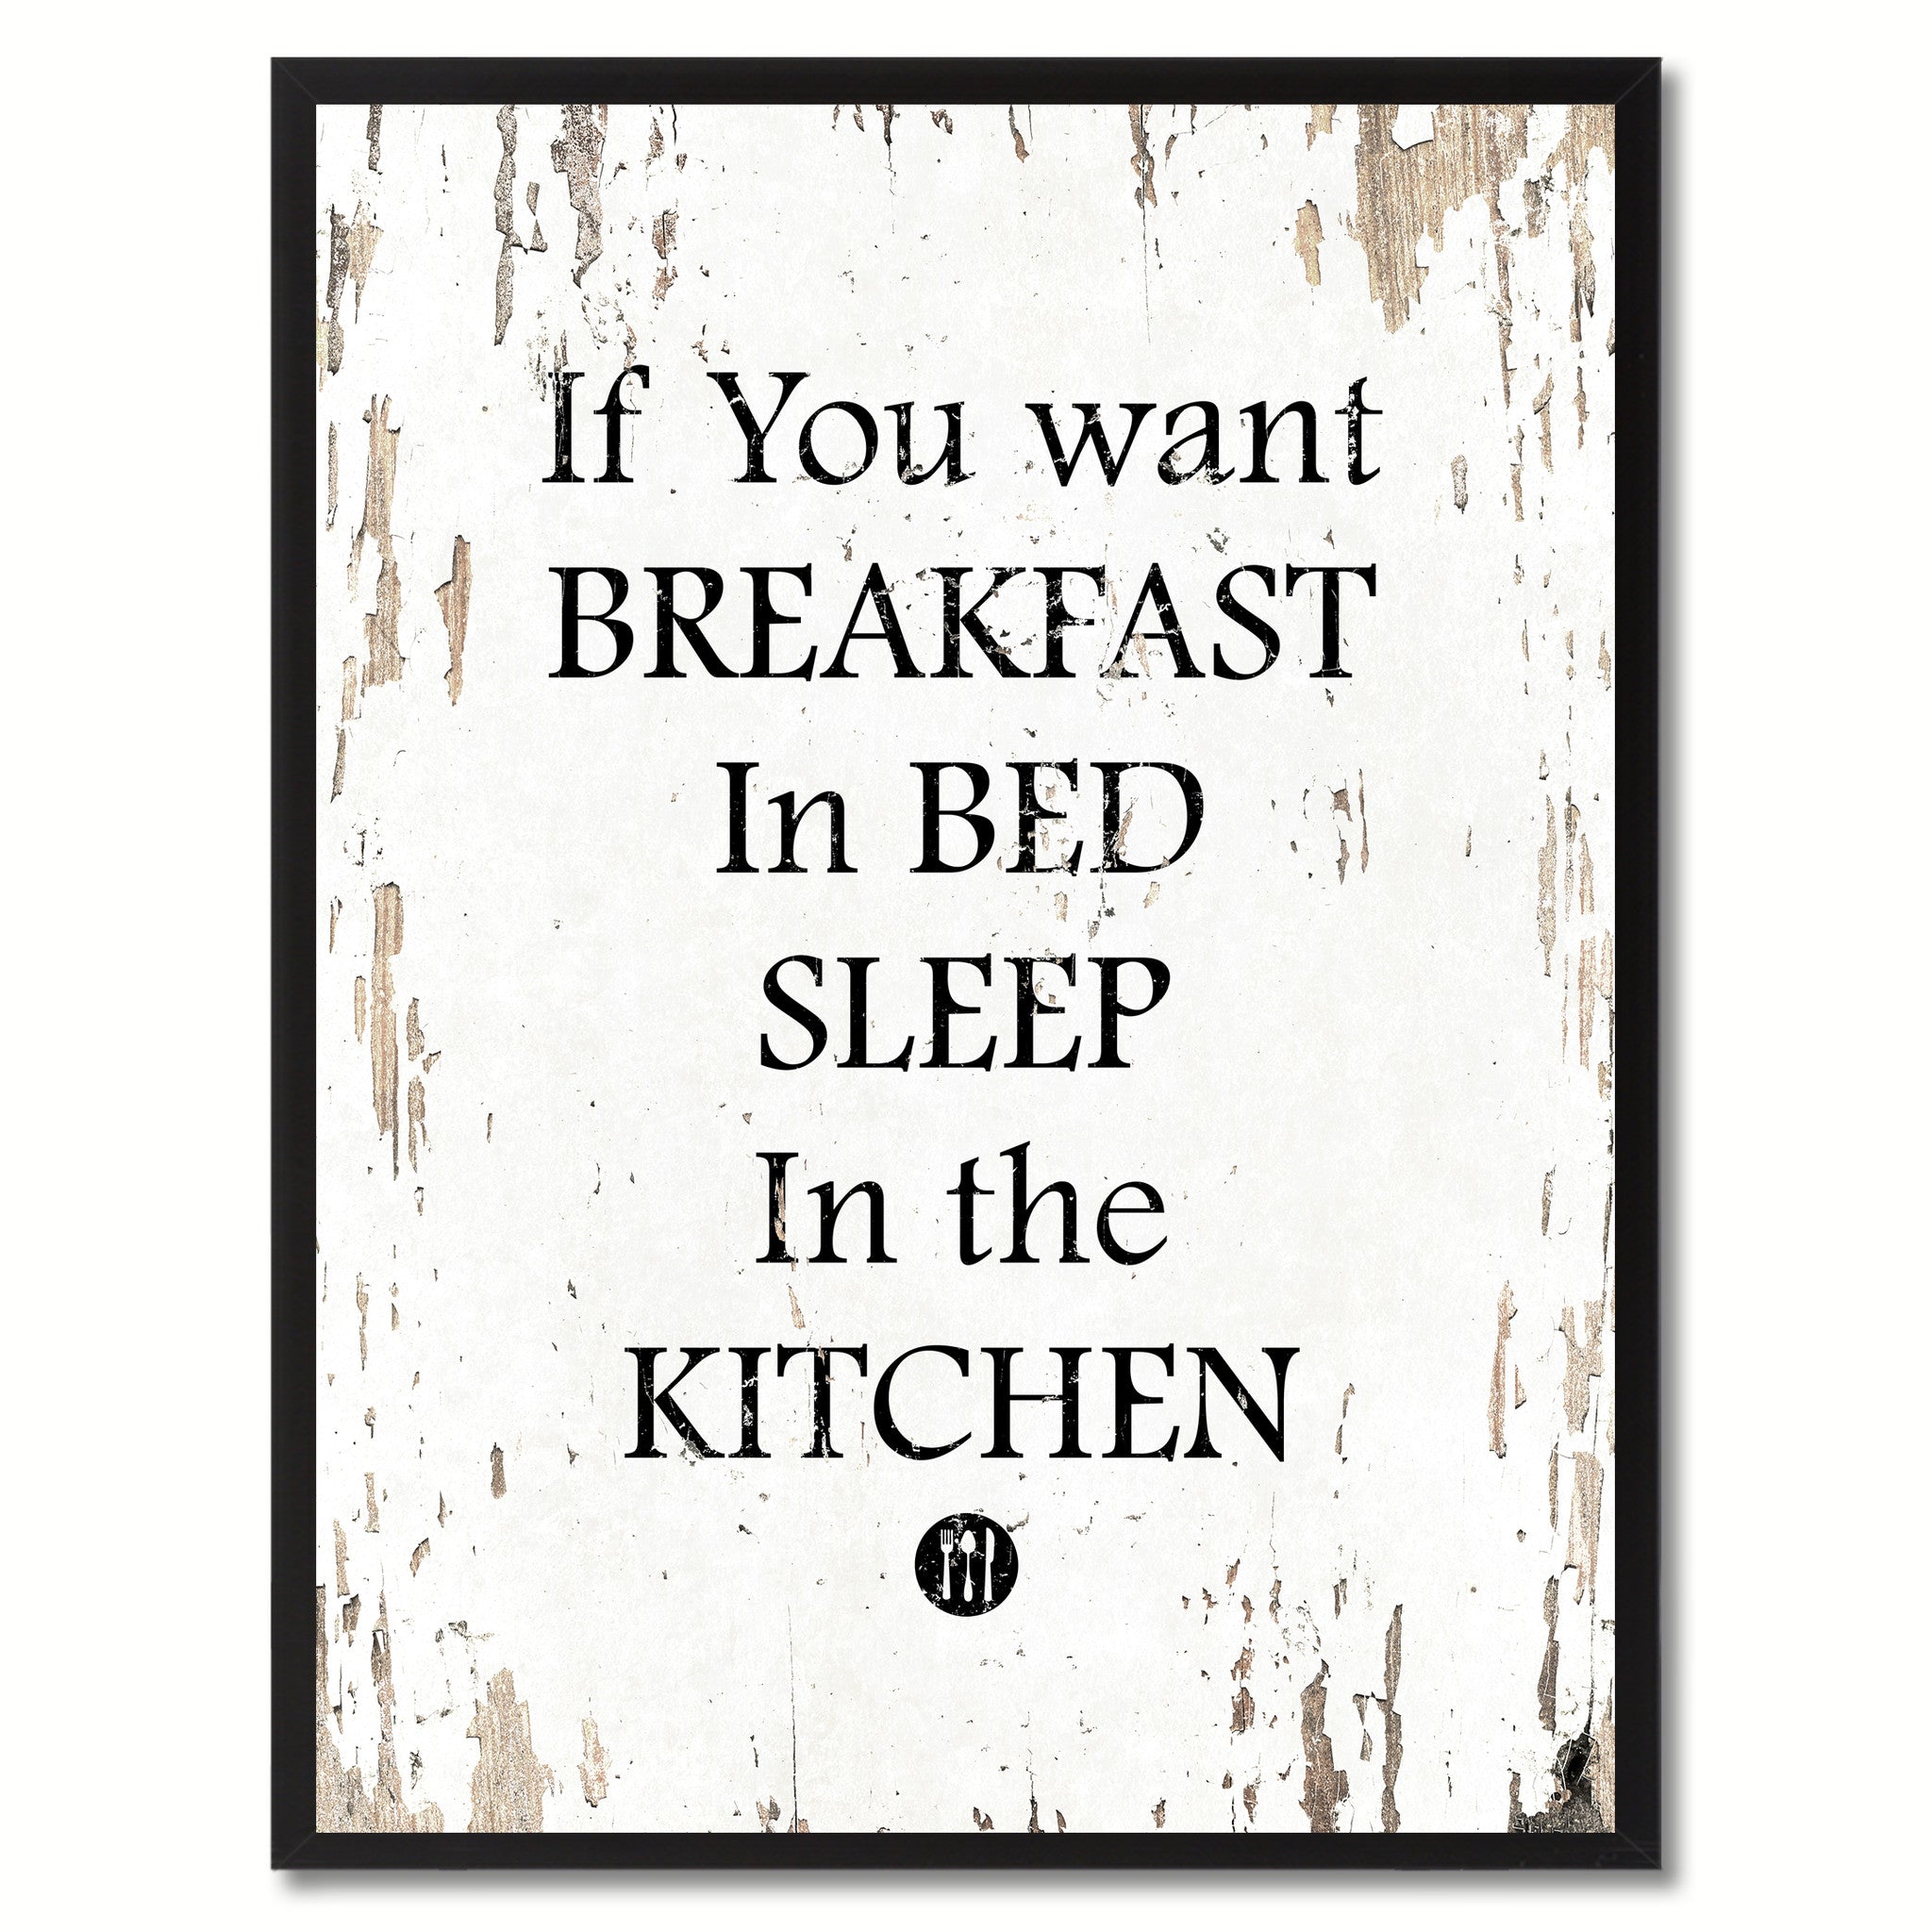 If you want breakfast in bed sleep in the kitchen Funny Quote Saying Gift Ideas Home Decor Wall Art